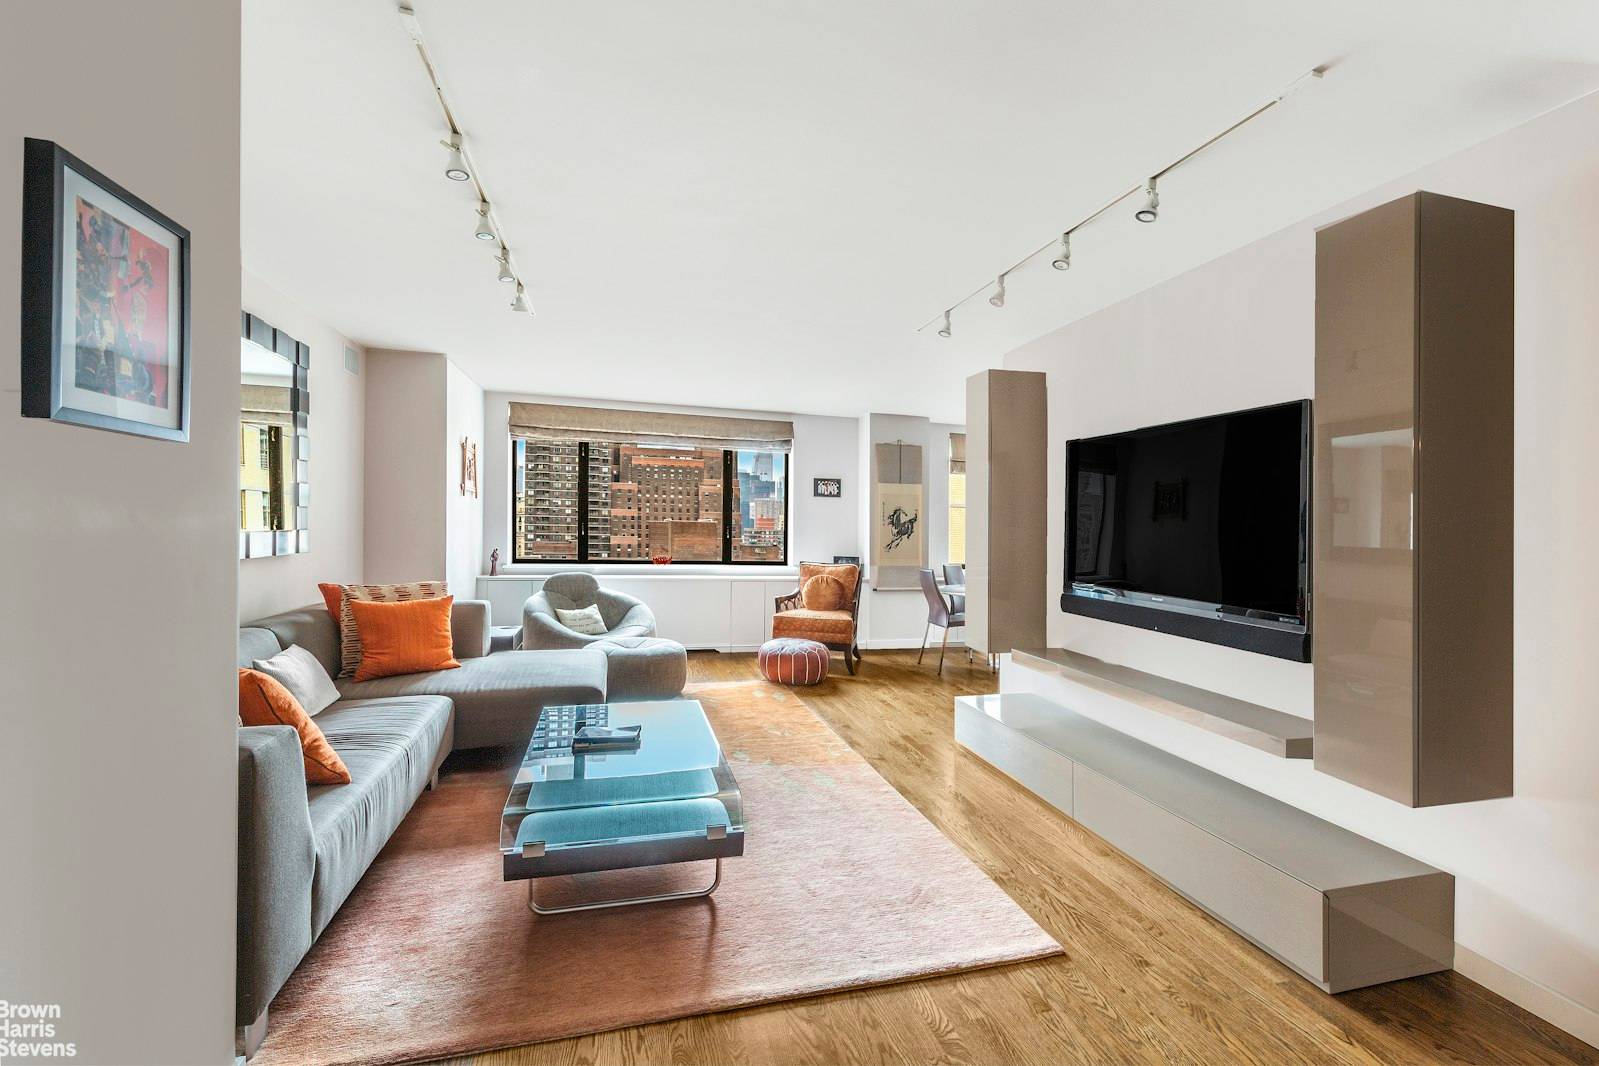 Elegantly renovated two bedroom, two and a half bathroom condominium sitting high in the sky in the heart of Lincoln Square and around the corner from Central Park.